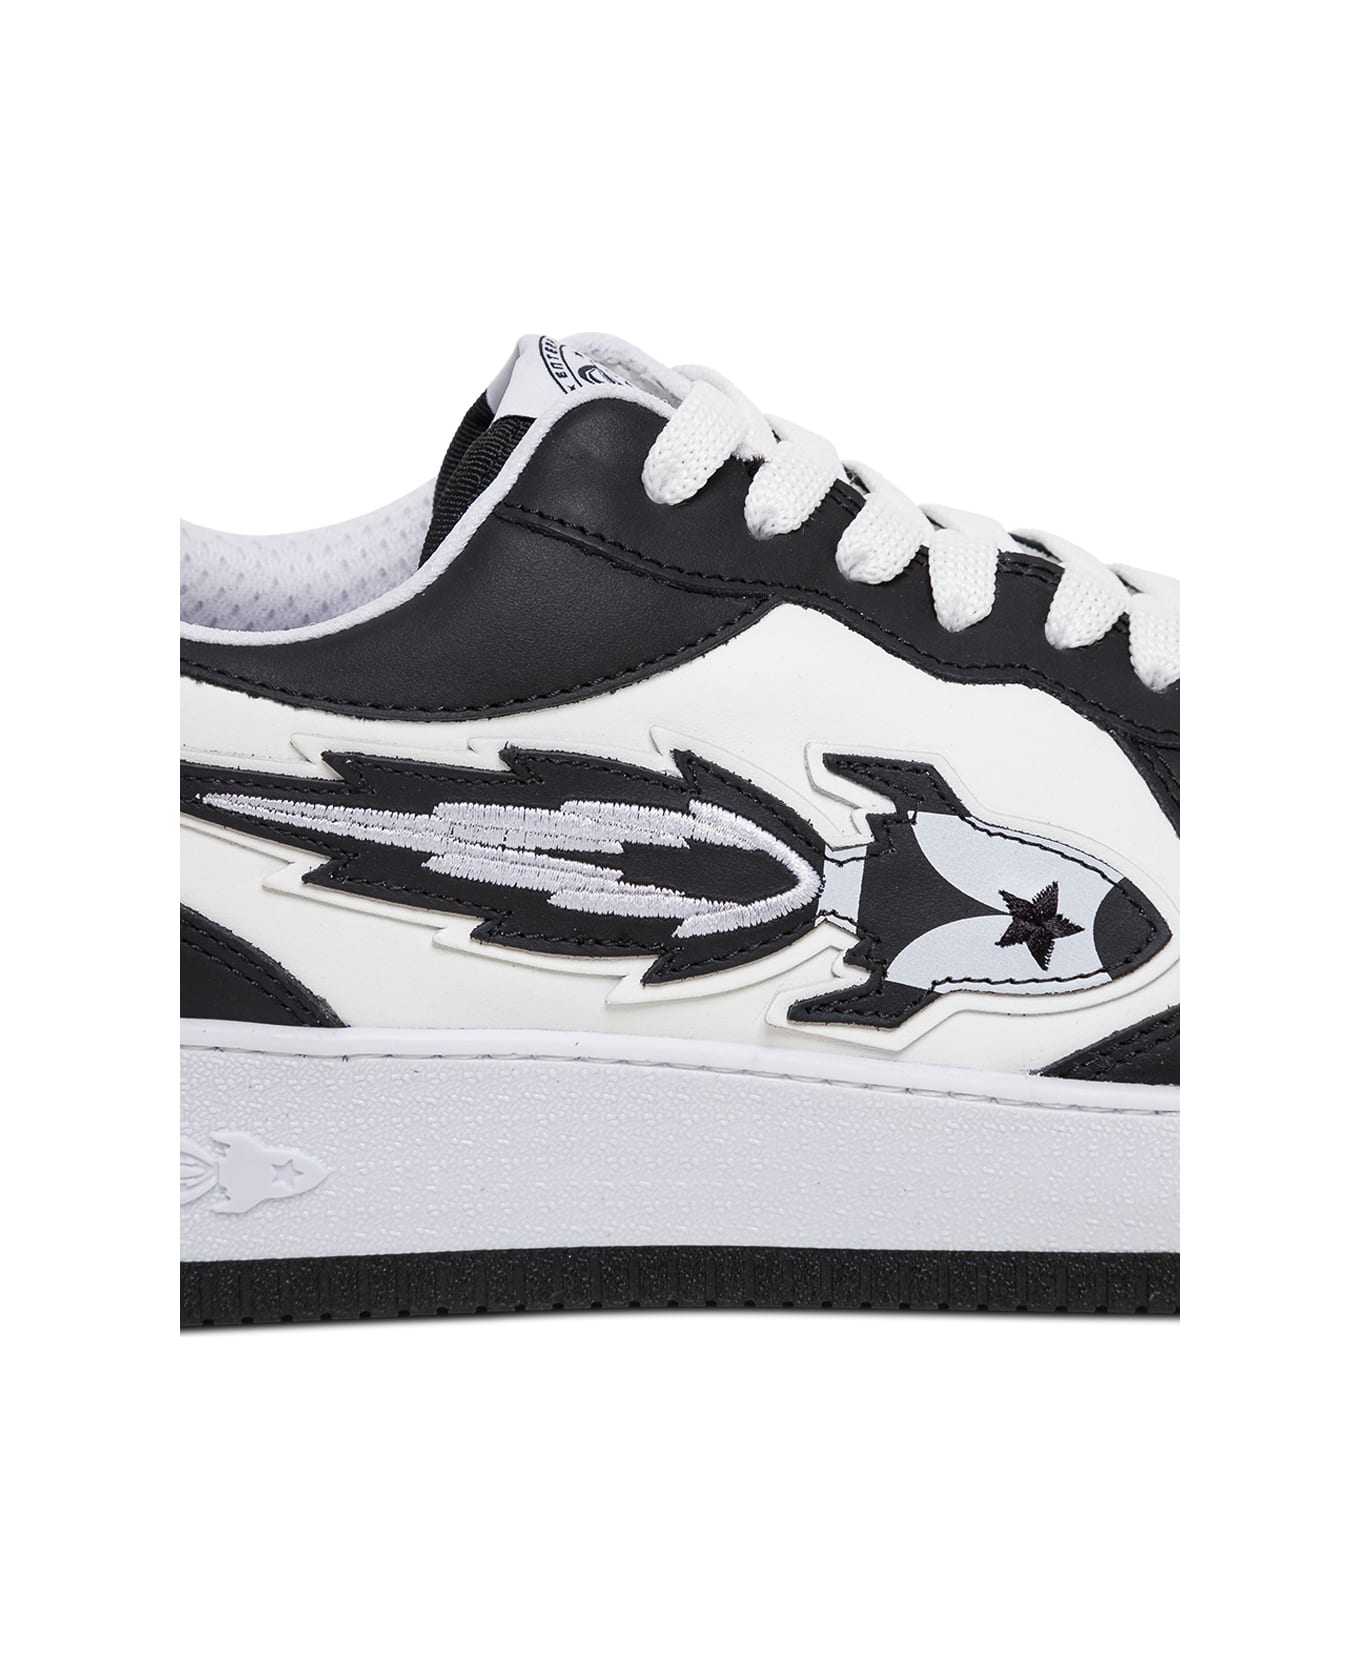 Enterprise Japan White And Black Leather Low Sneakers - White/black